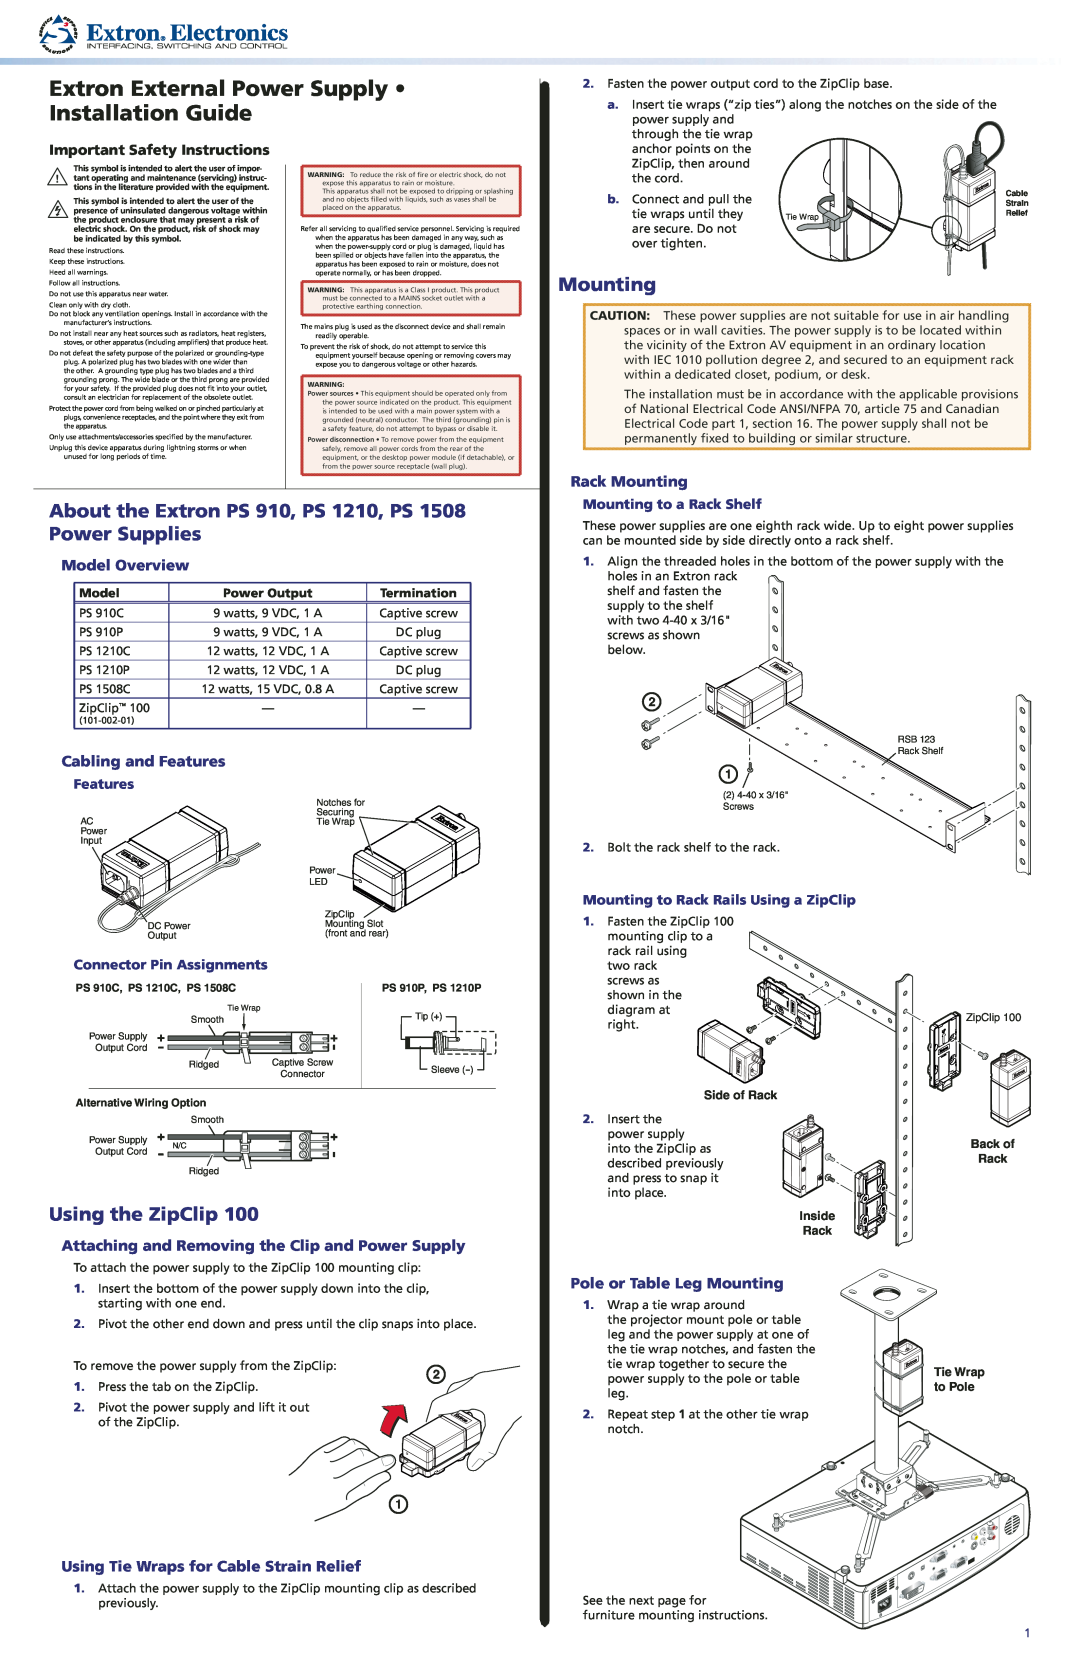 Extron electronic manual About PS 910, PS 1210, PS 1508 Power Supplies, Using the ZipClip, Rack Mounting, Model, Part 